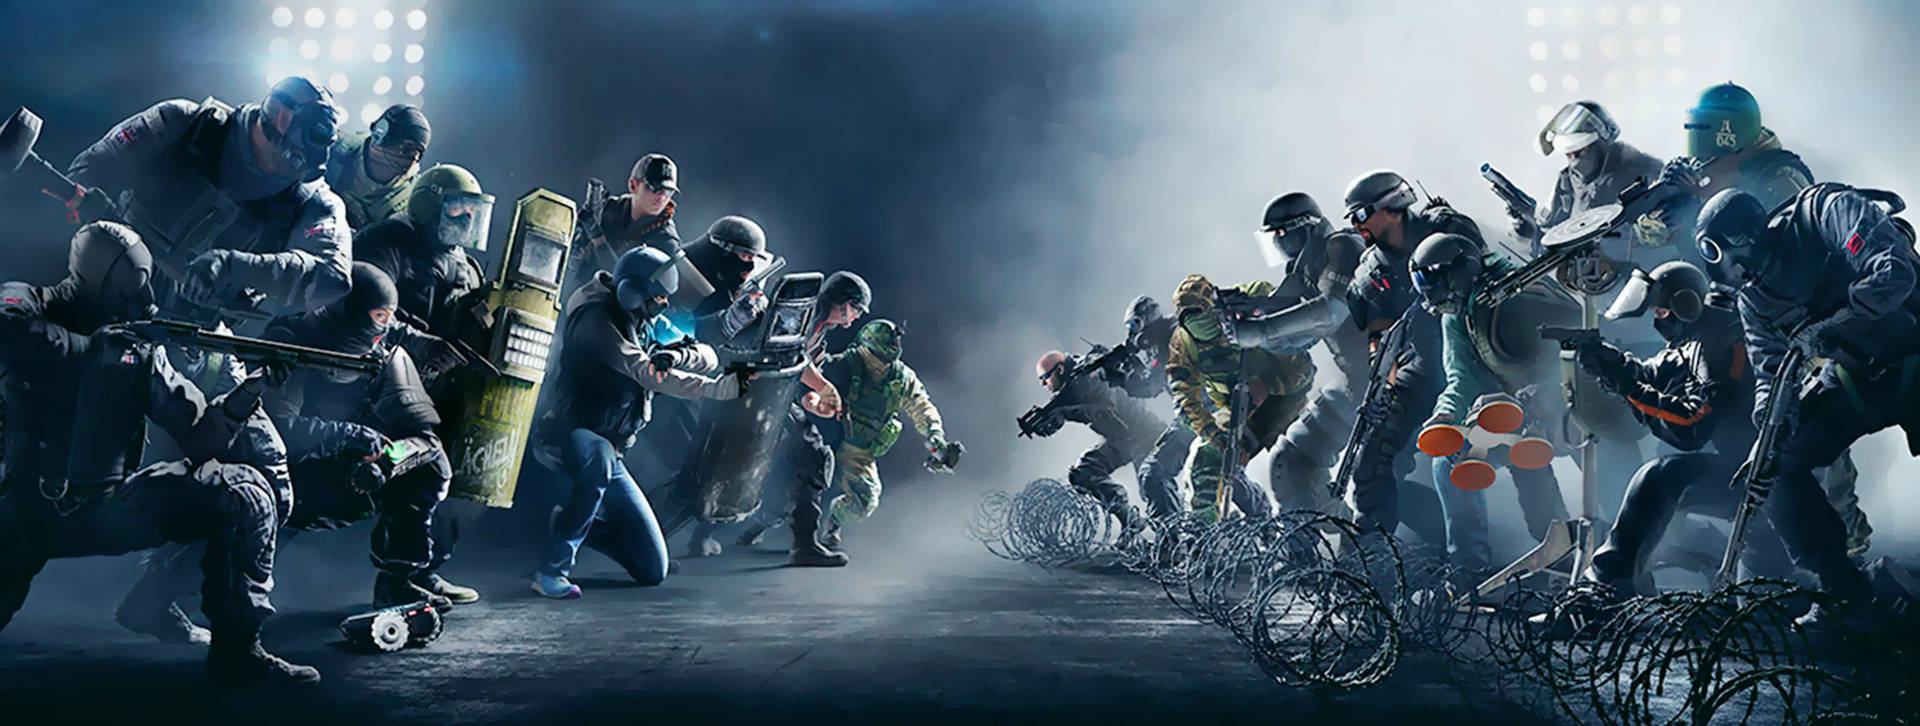 Attackers and defenders come together in Rainbow Six Siege Wallpaper